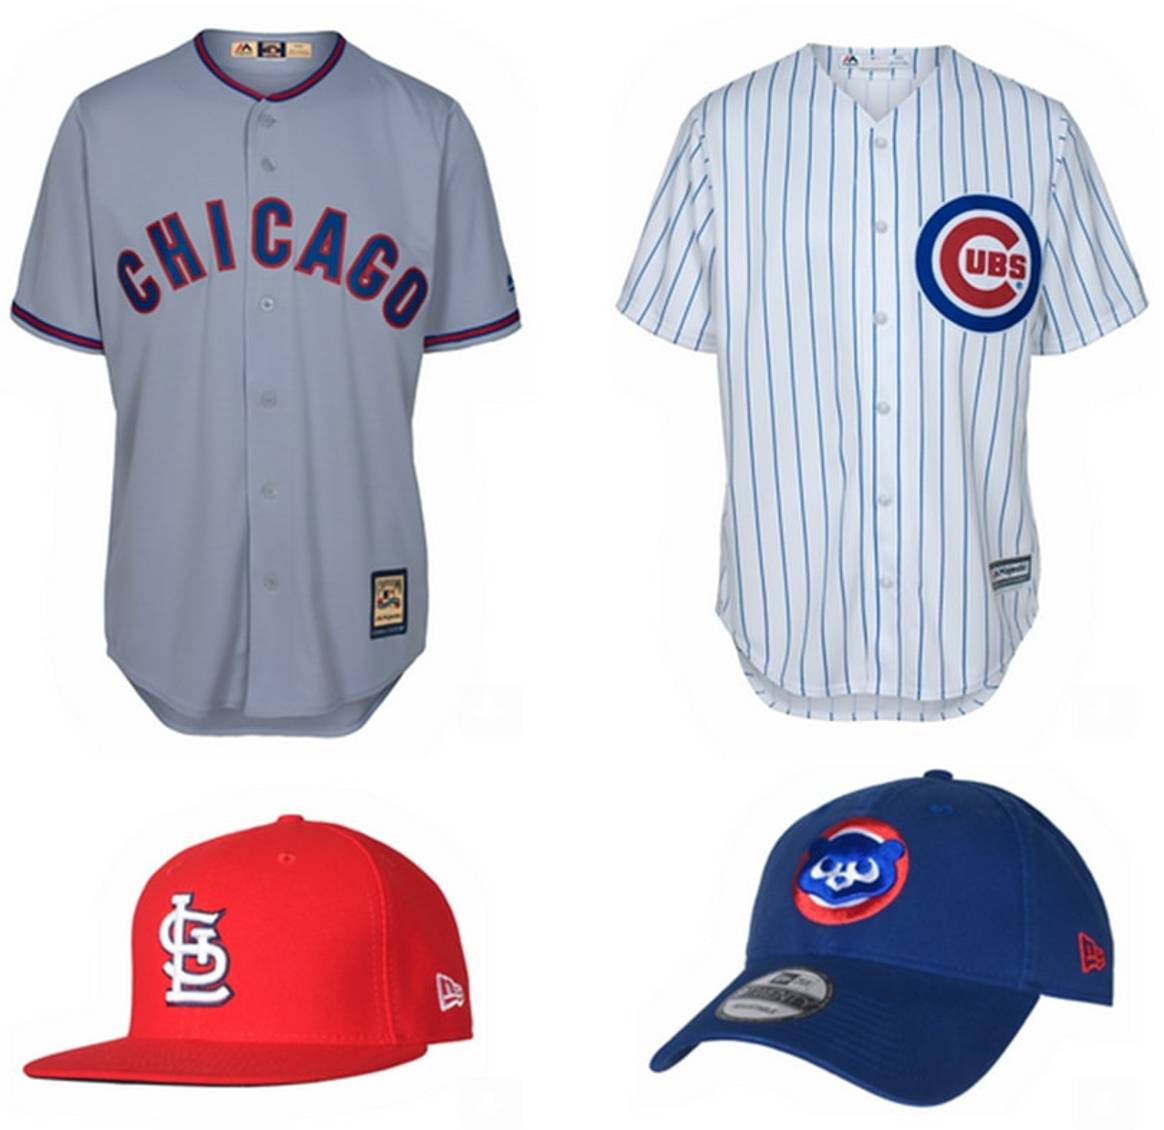 MLB - Presenting Chicago Cubs & St. Louis Cardinals